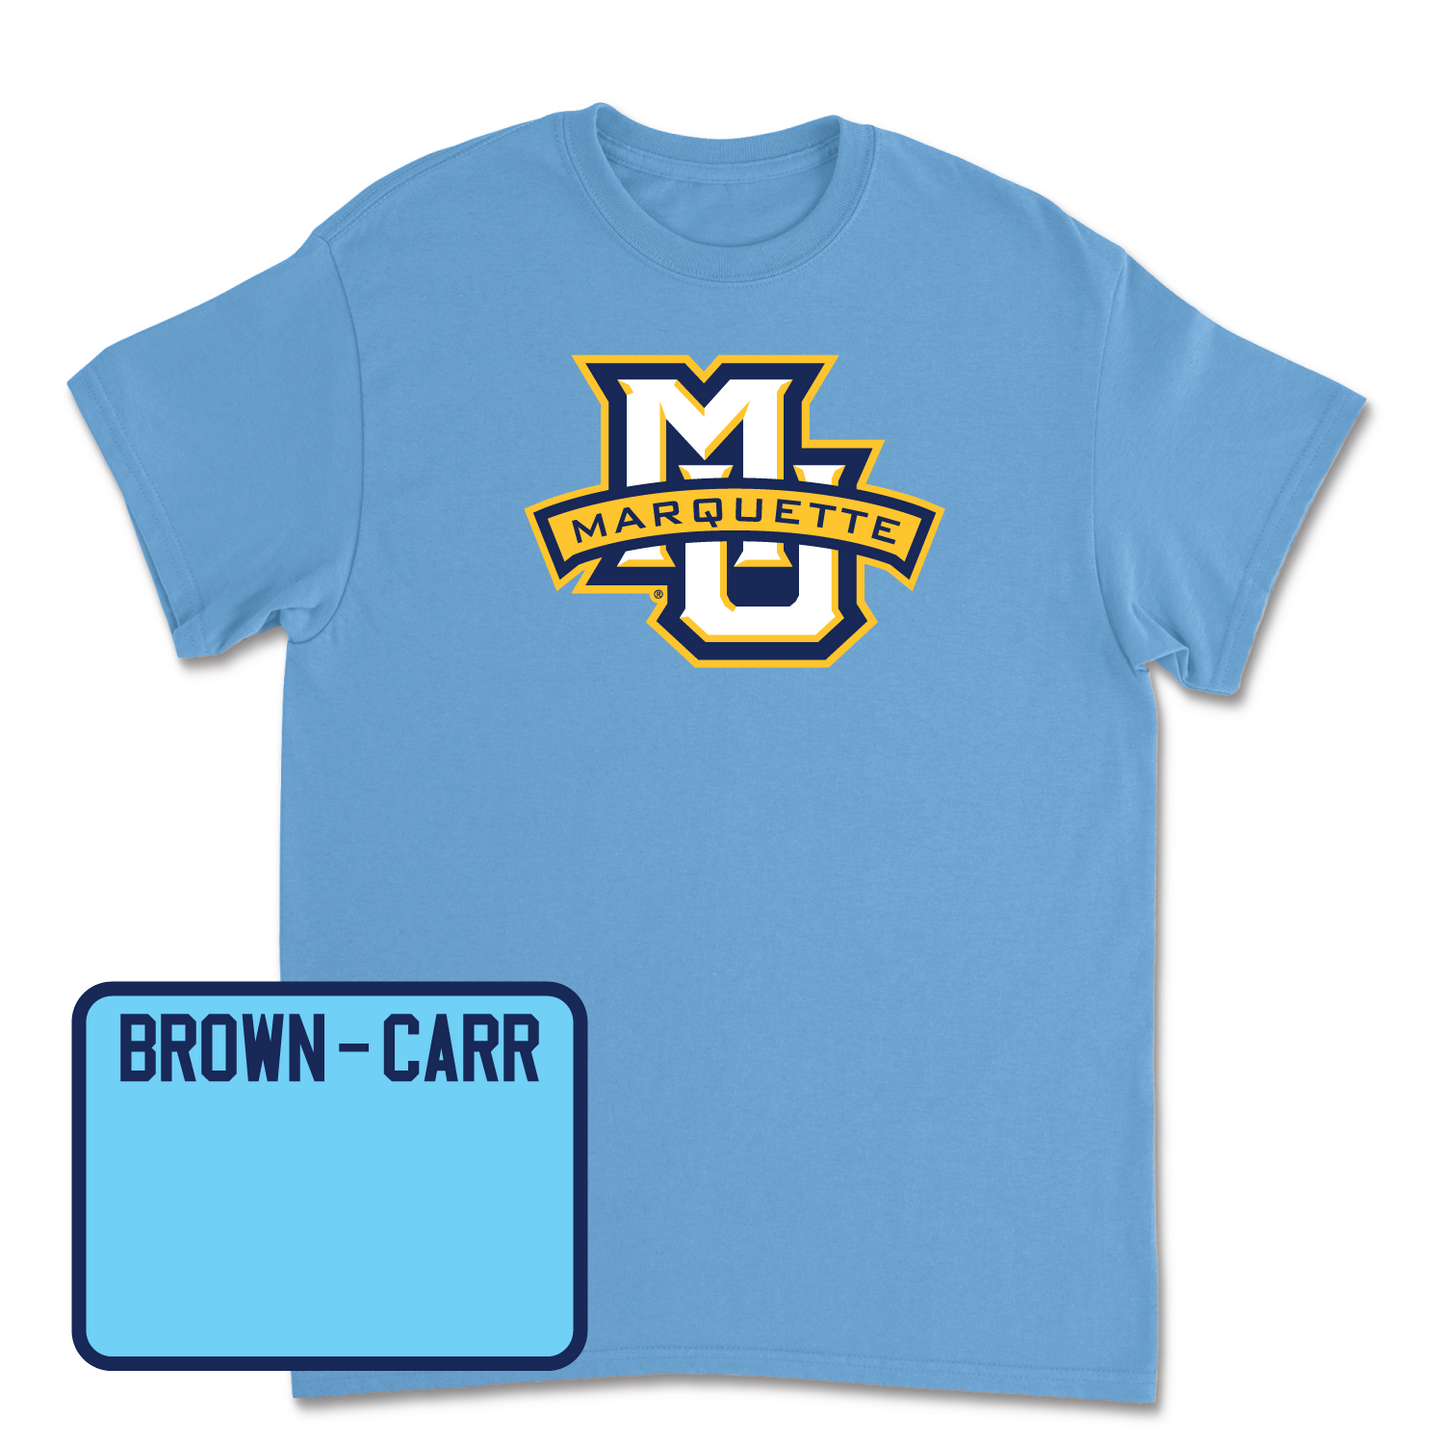 Championship Blue Track & Field Marquette Tee 2 Youth Medium / Siani Brown-Carr